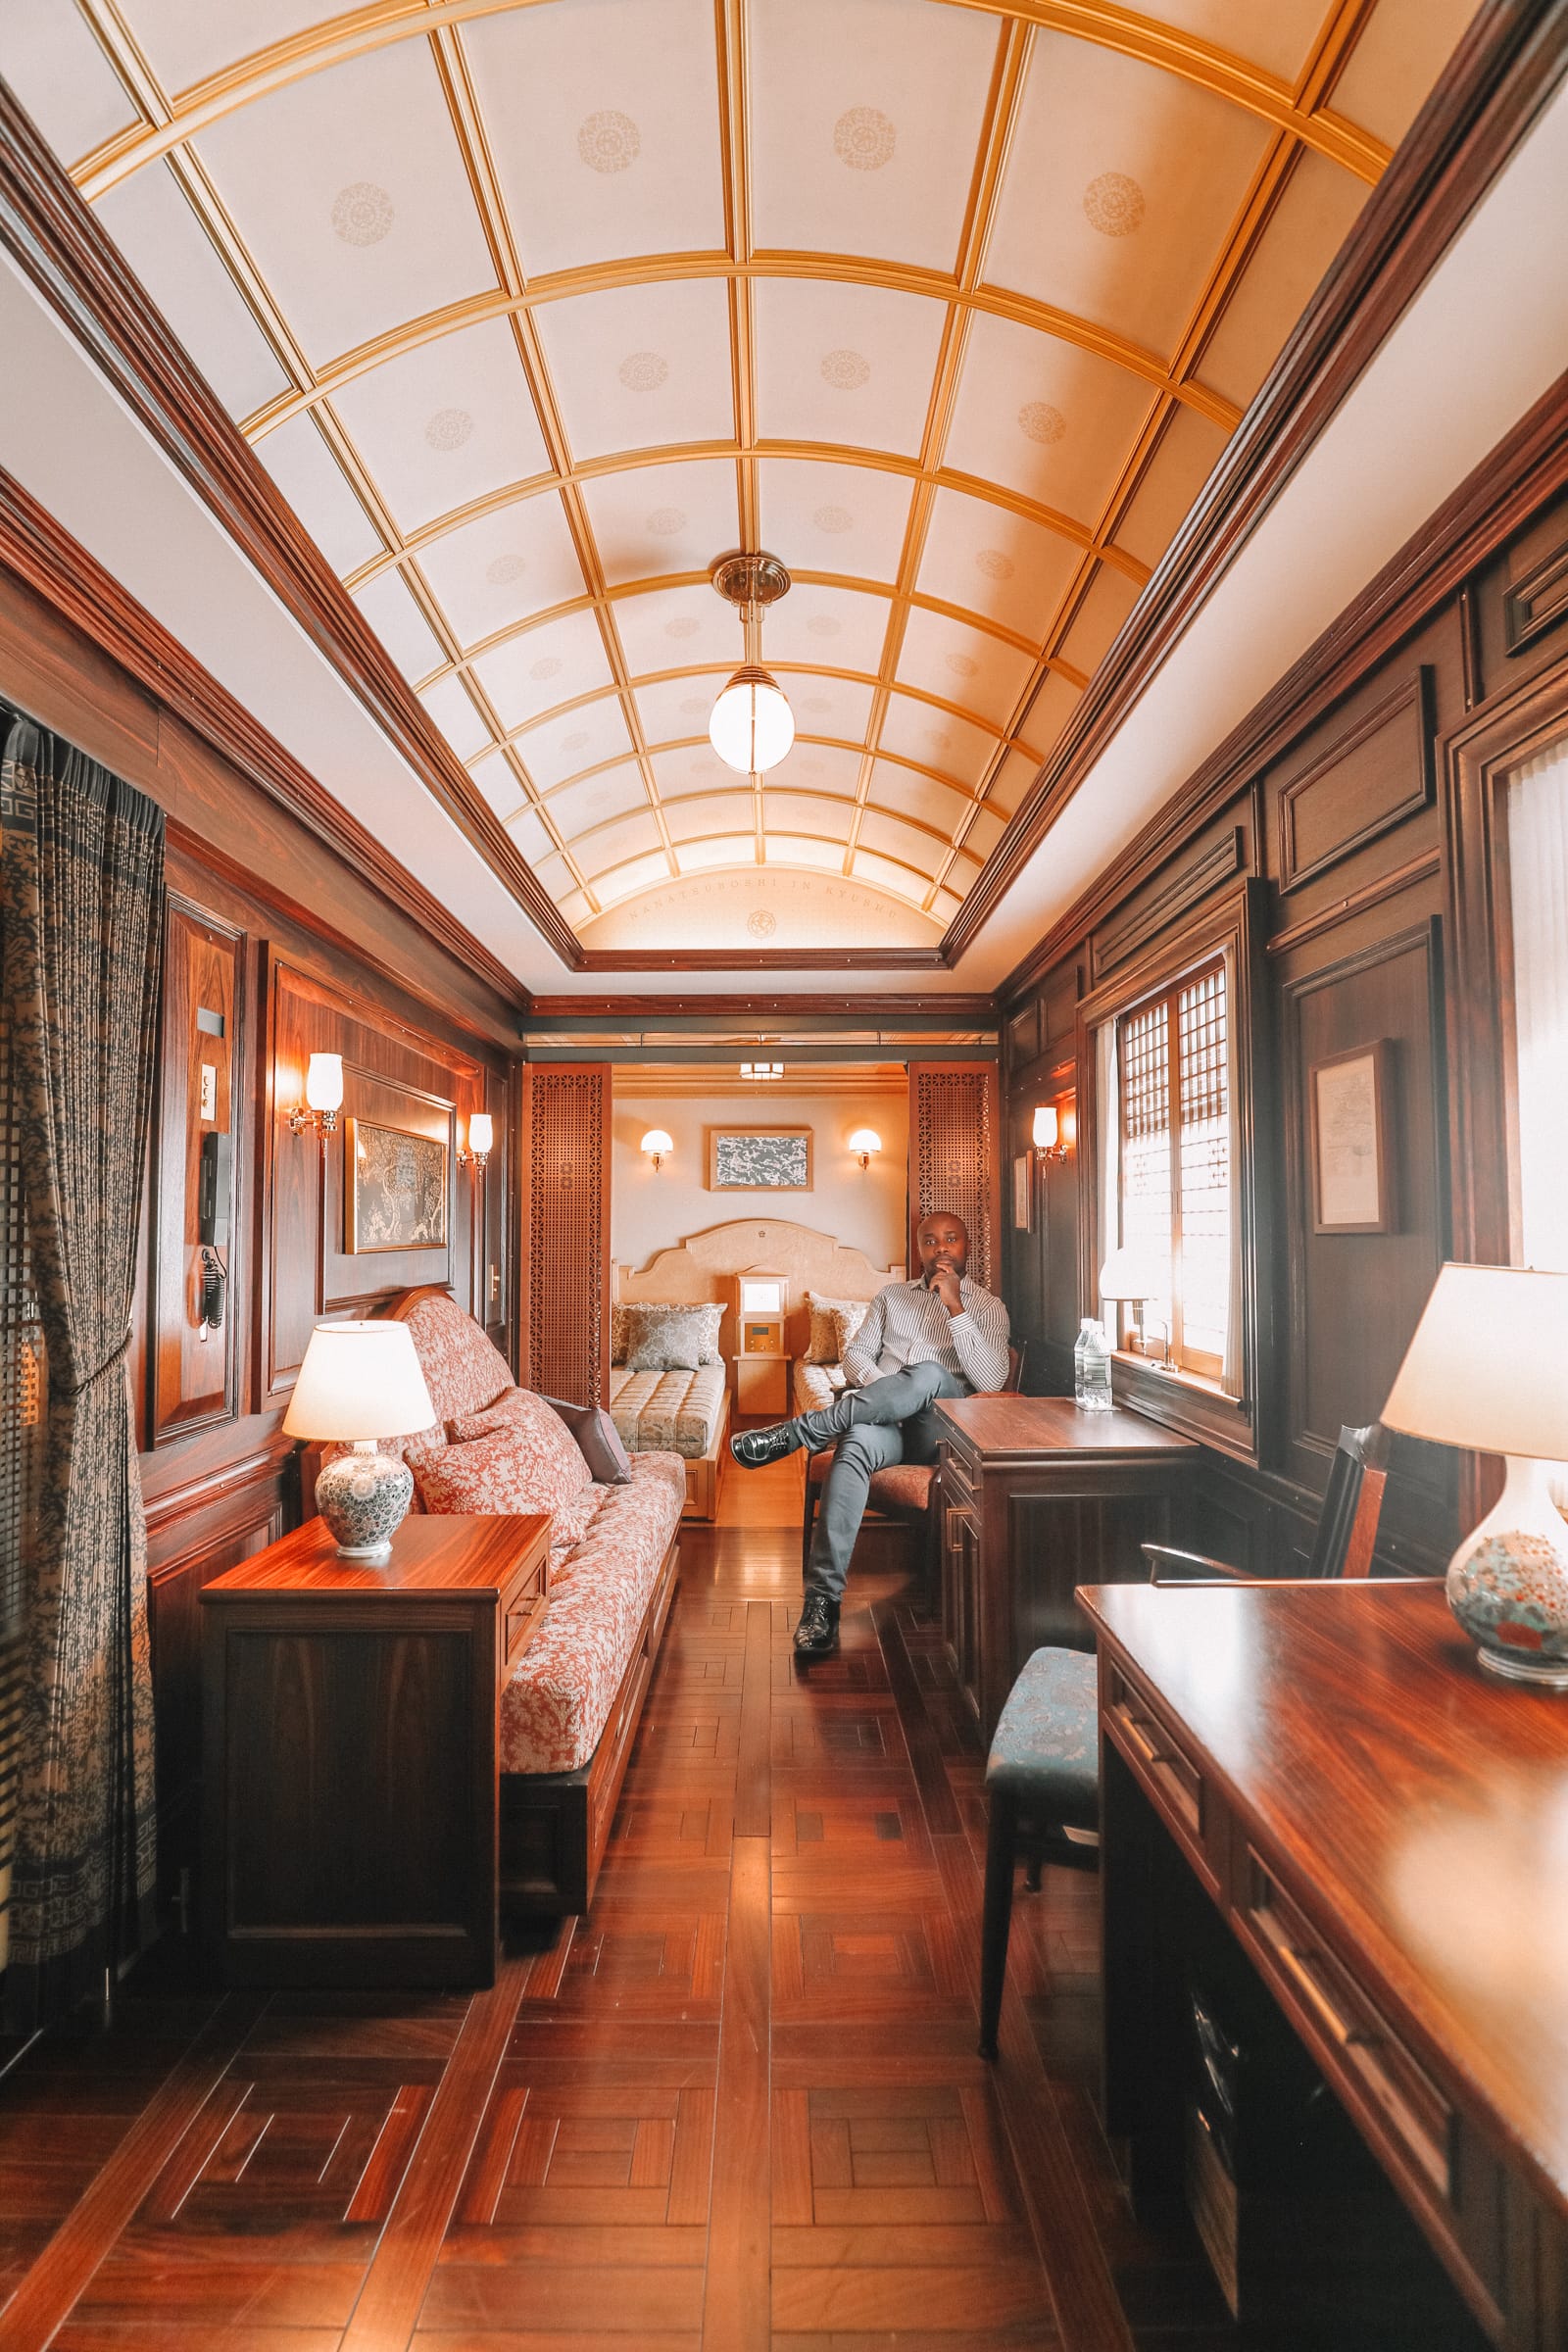 Is this the most luxurious train carriage in the world?